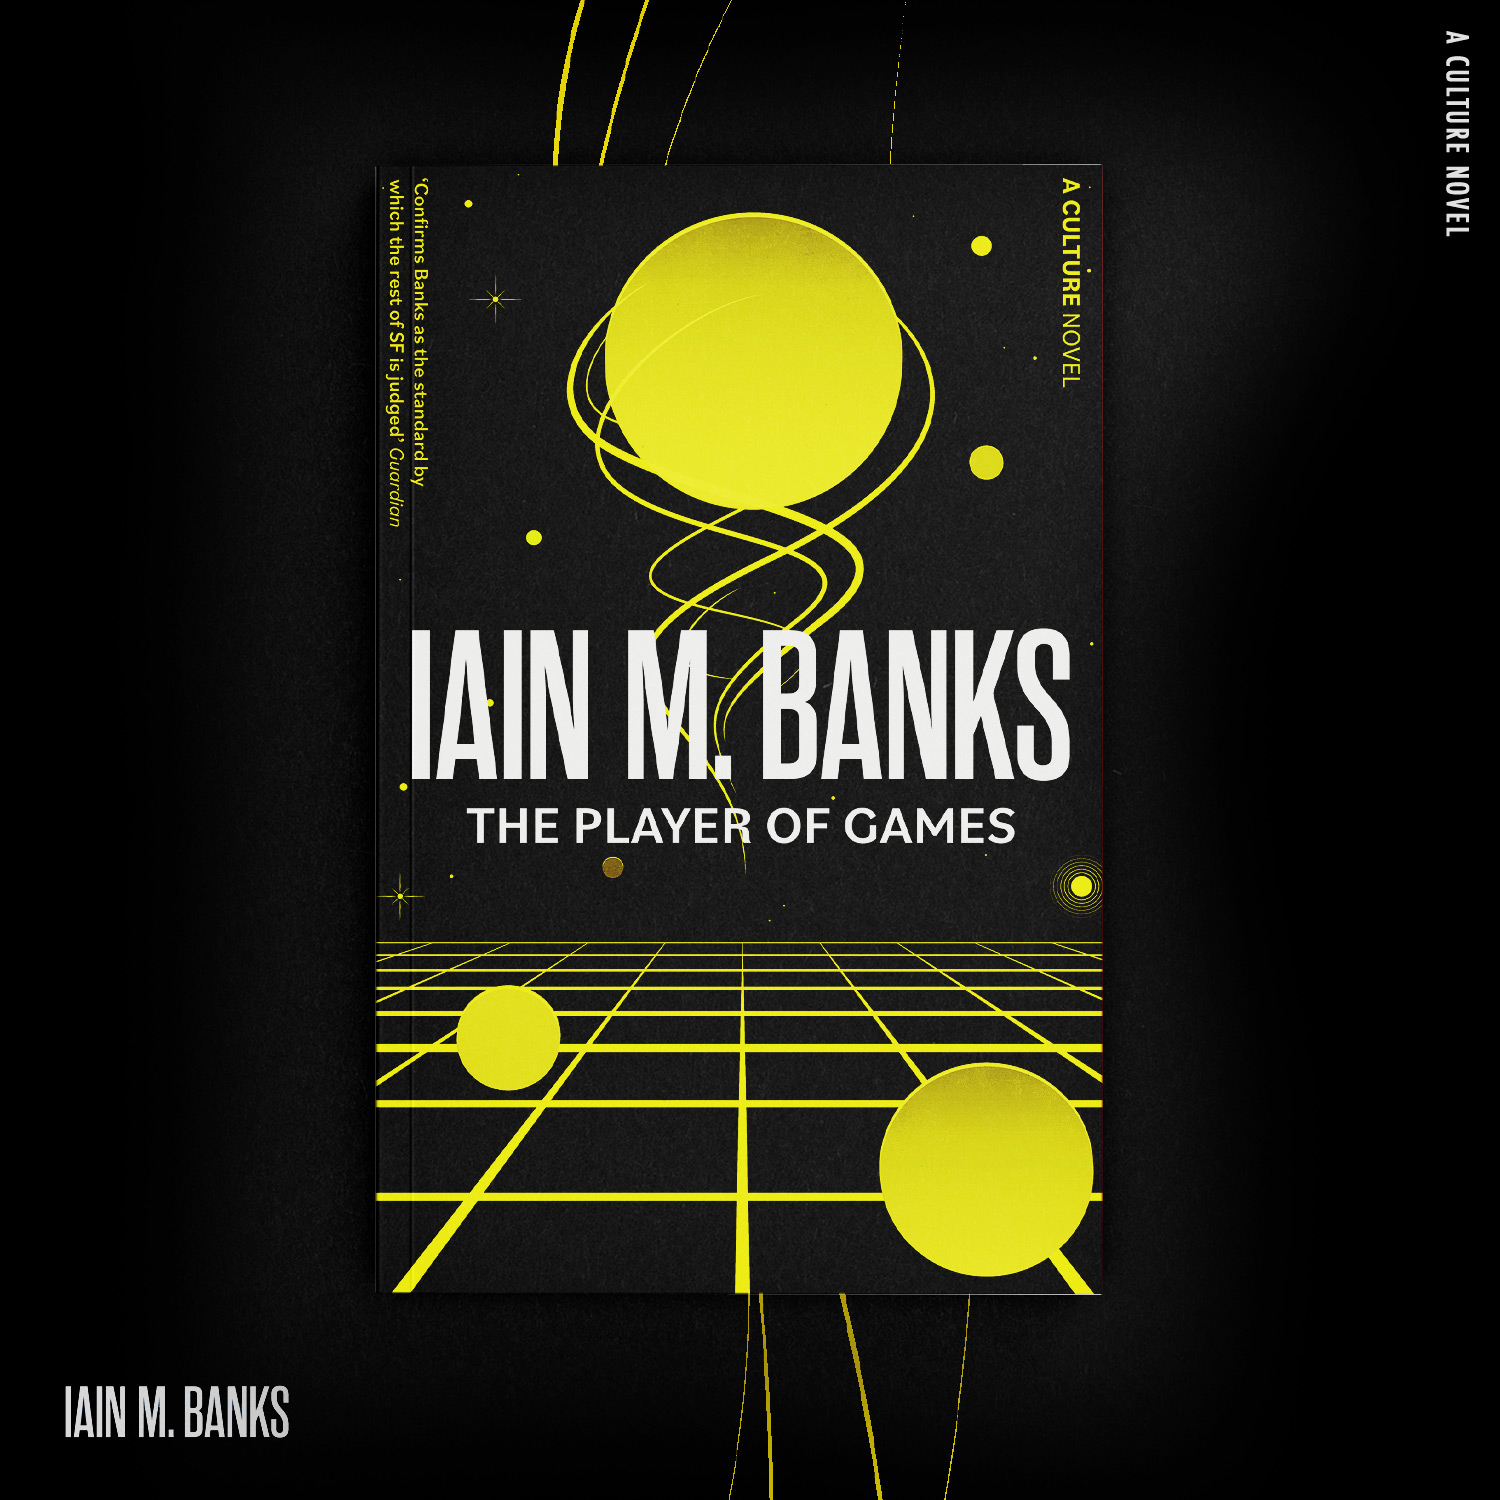 Inversions (Culture, #6) by Iain M. Banks